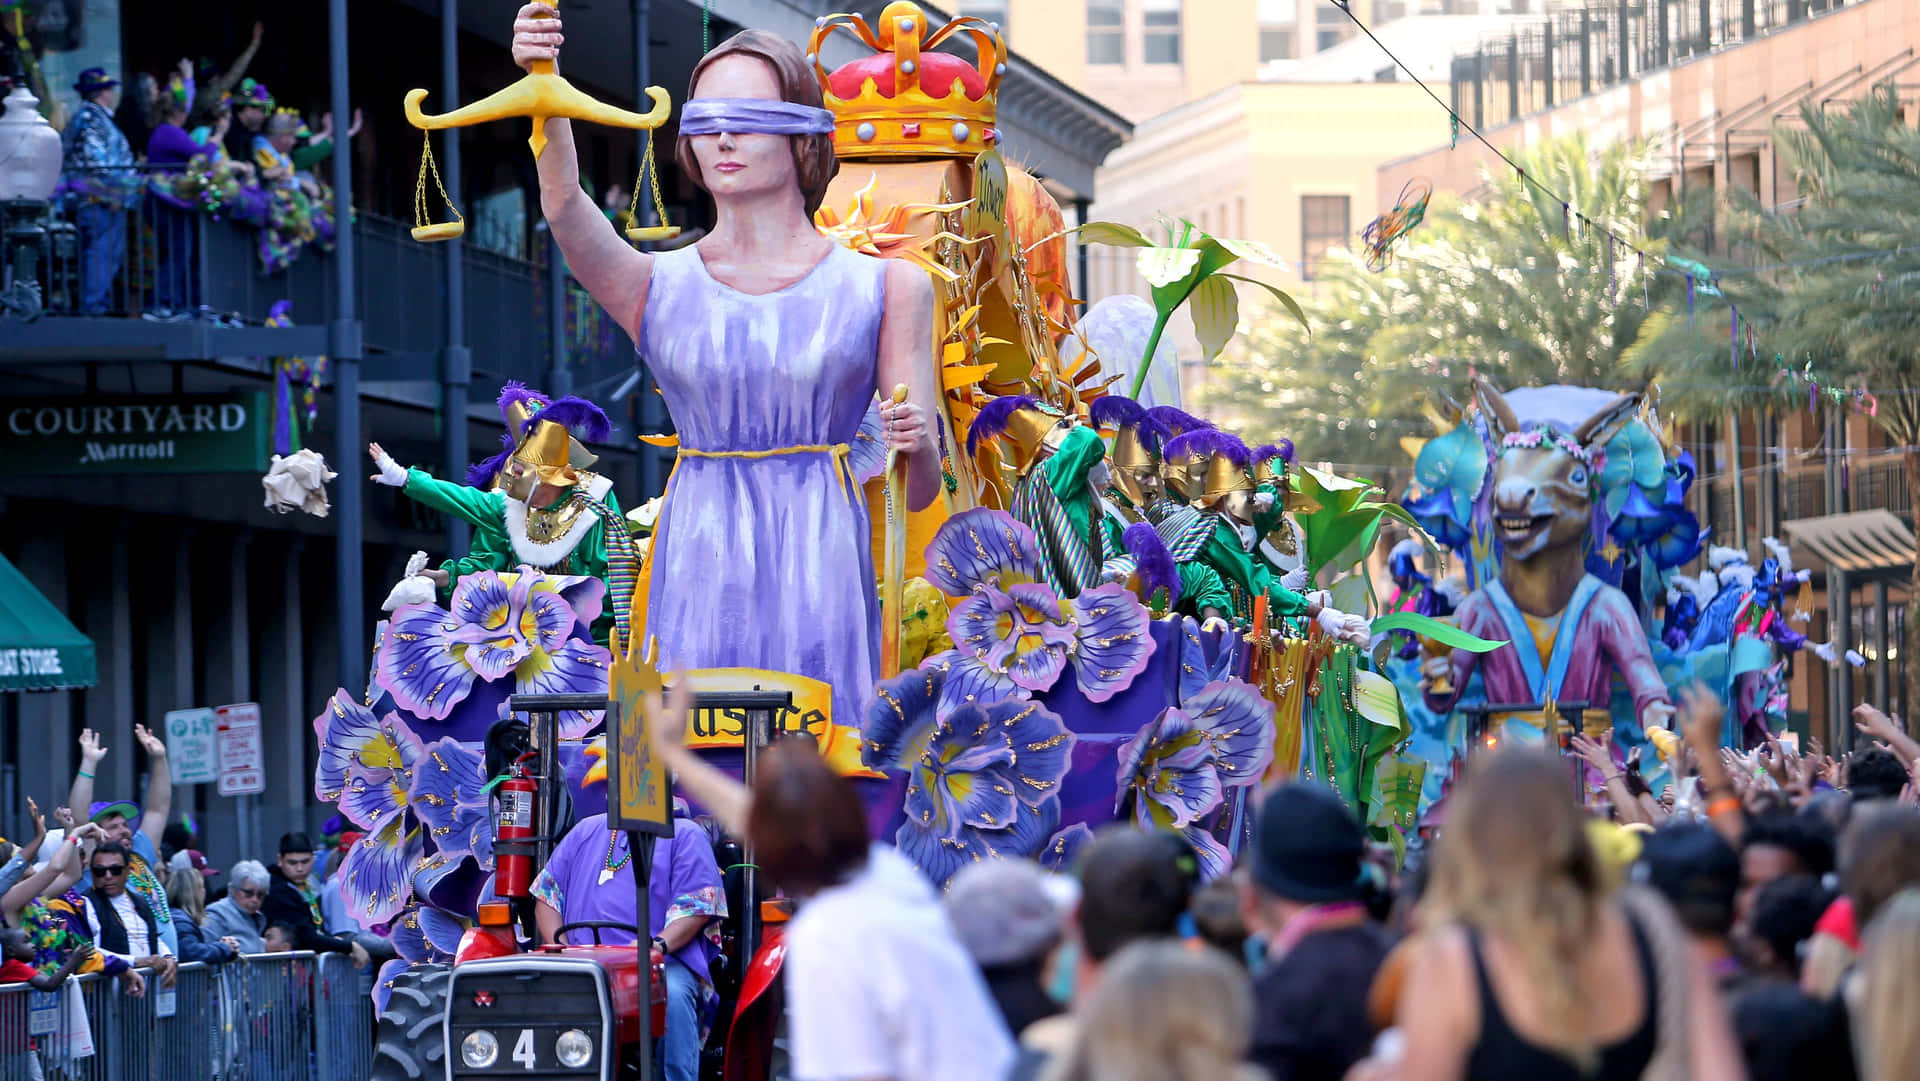 Celebrating Mardi Gras In The Streets Of New Orleans